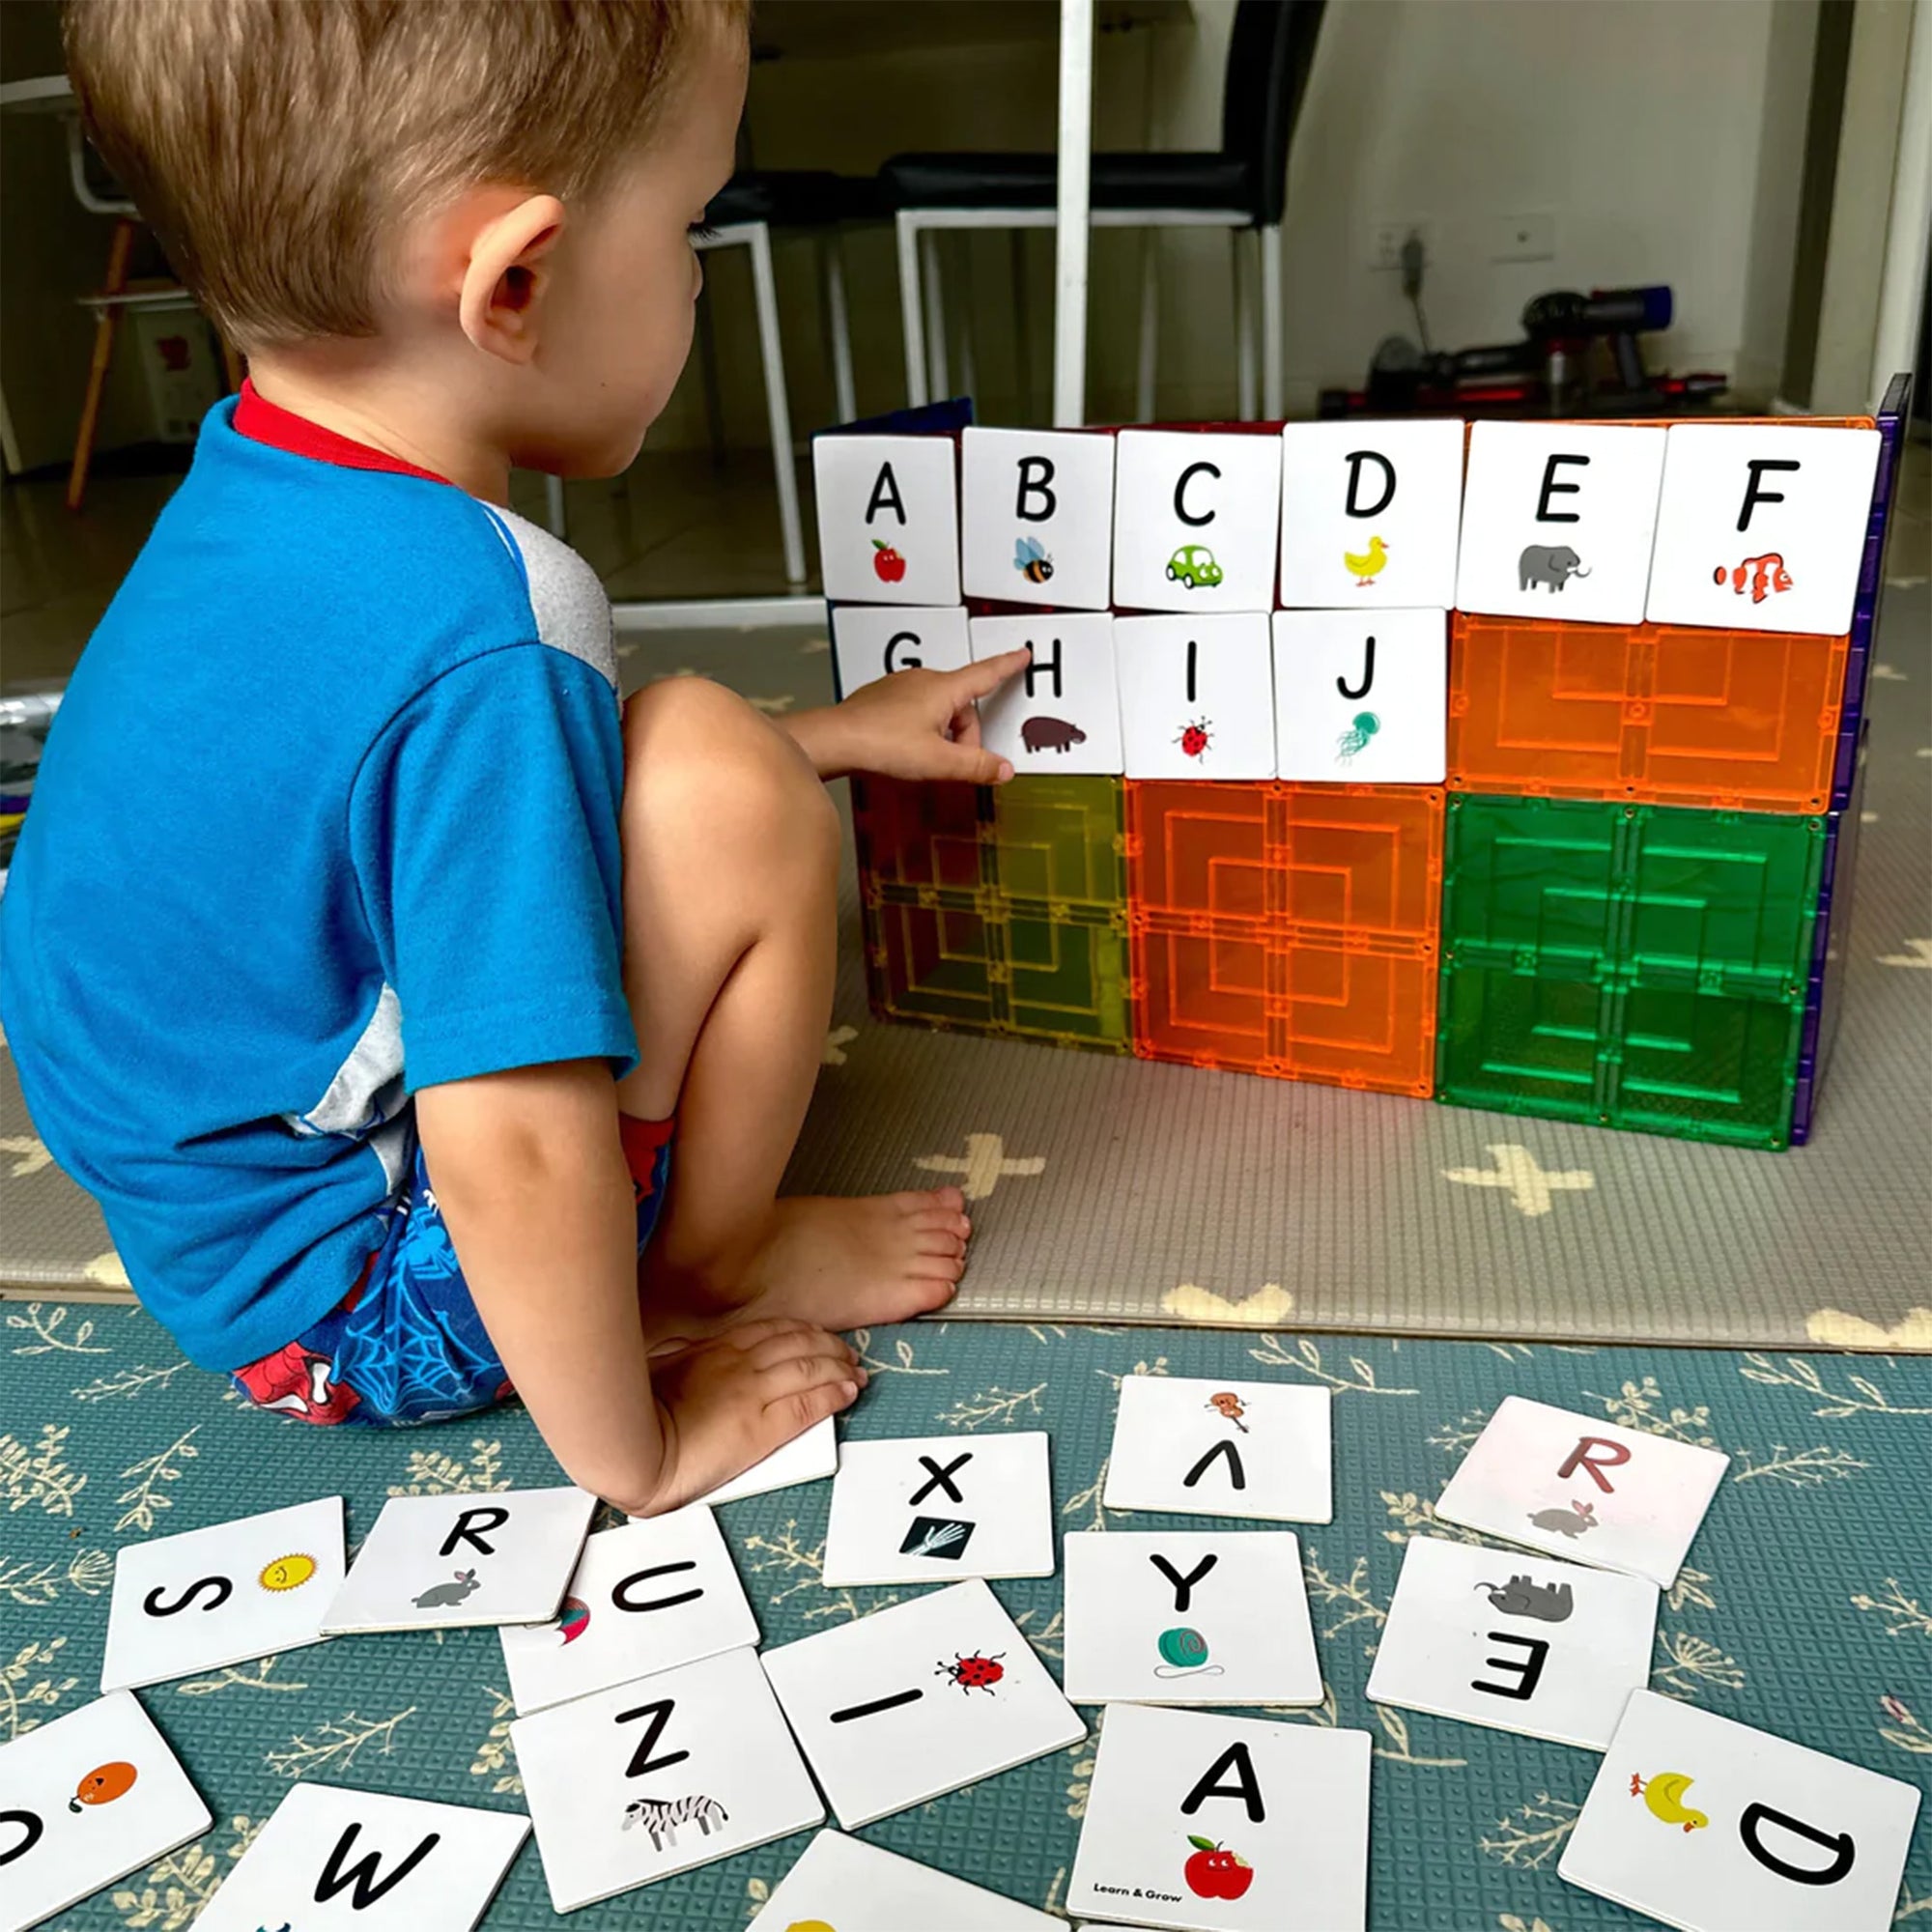 Magnetic Tile Topper - Alphabet Upper Case 40 pieces | Learn and Grow | The Elly Store